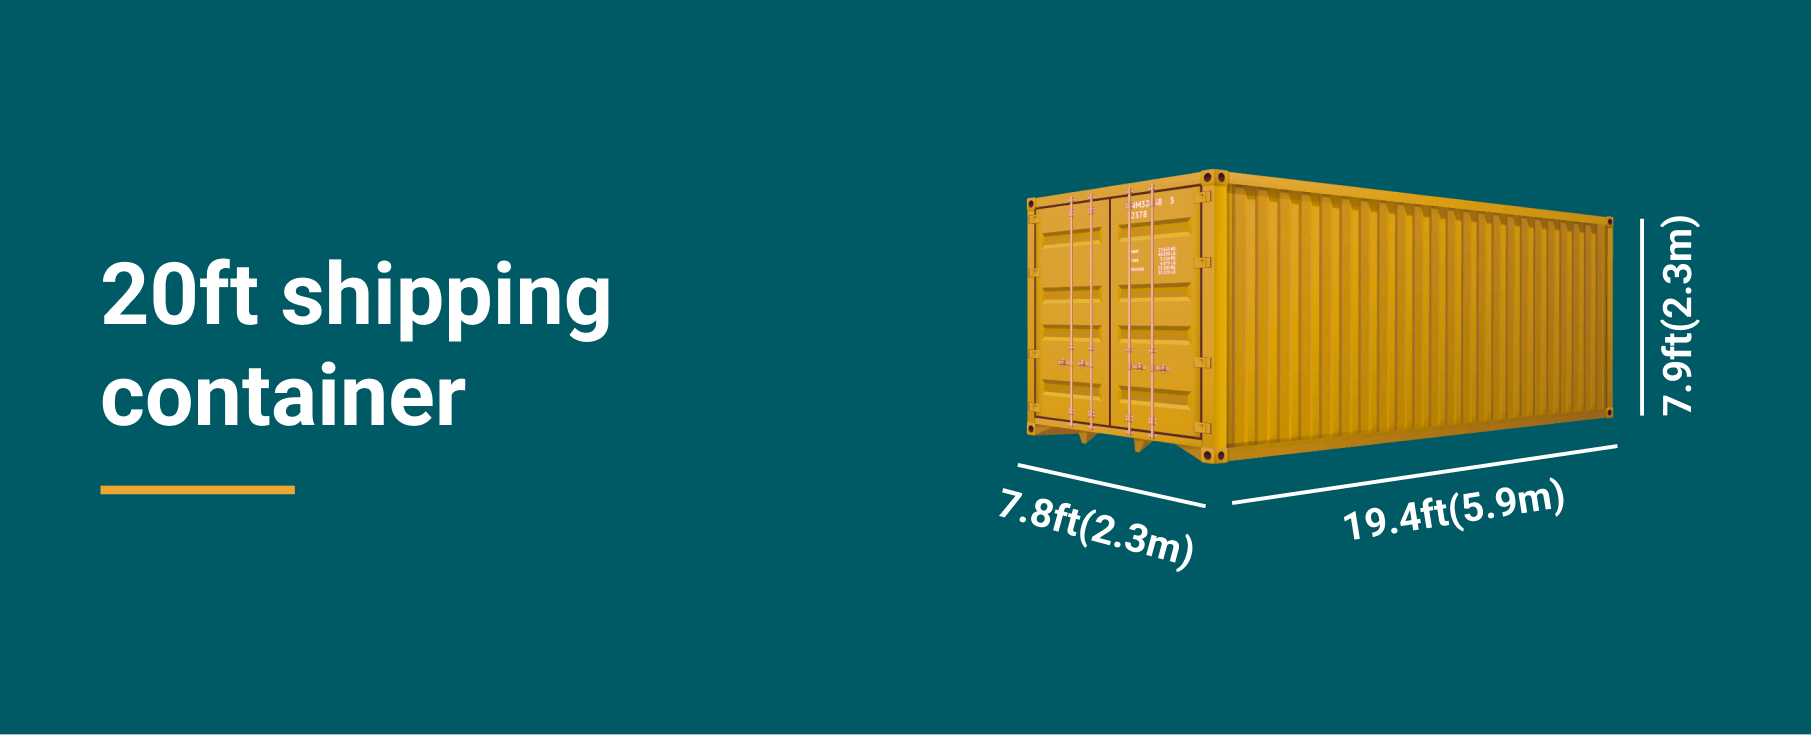 20ft Shipping Container Dimensions - Design Talk